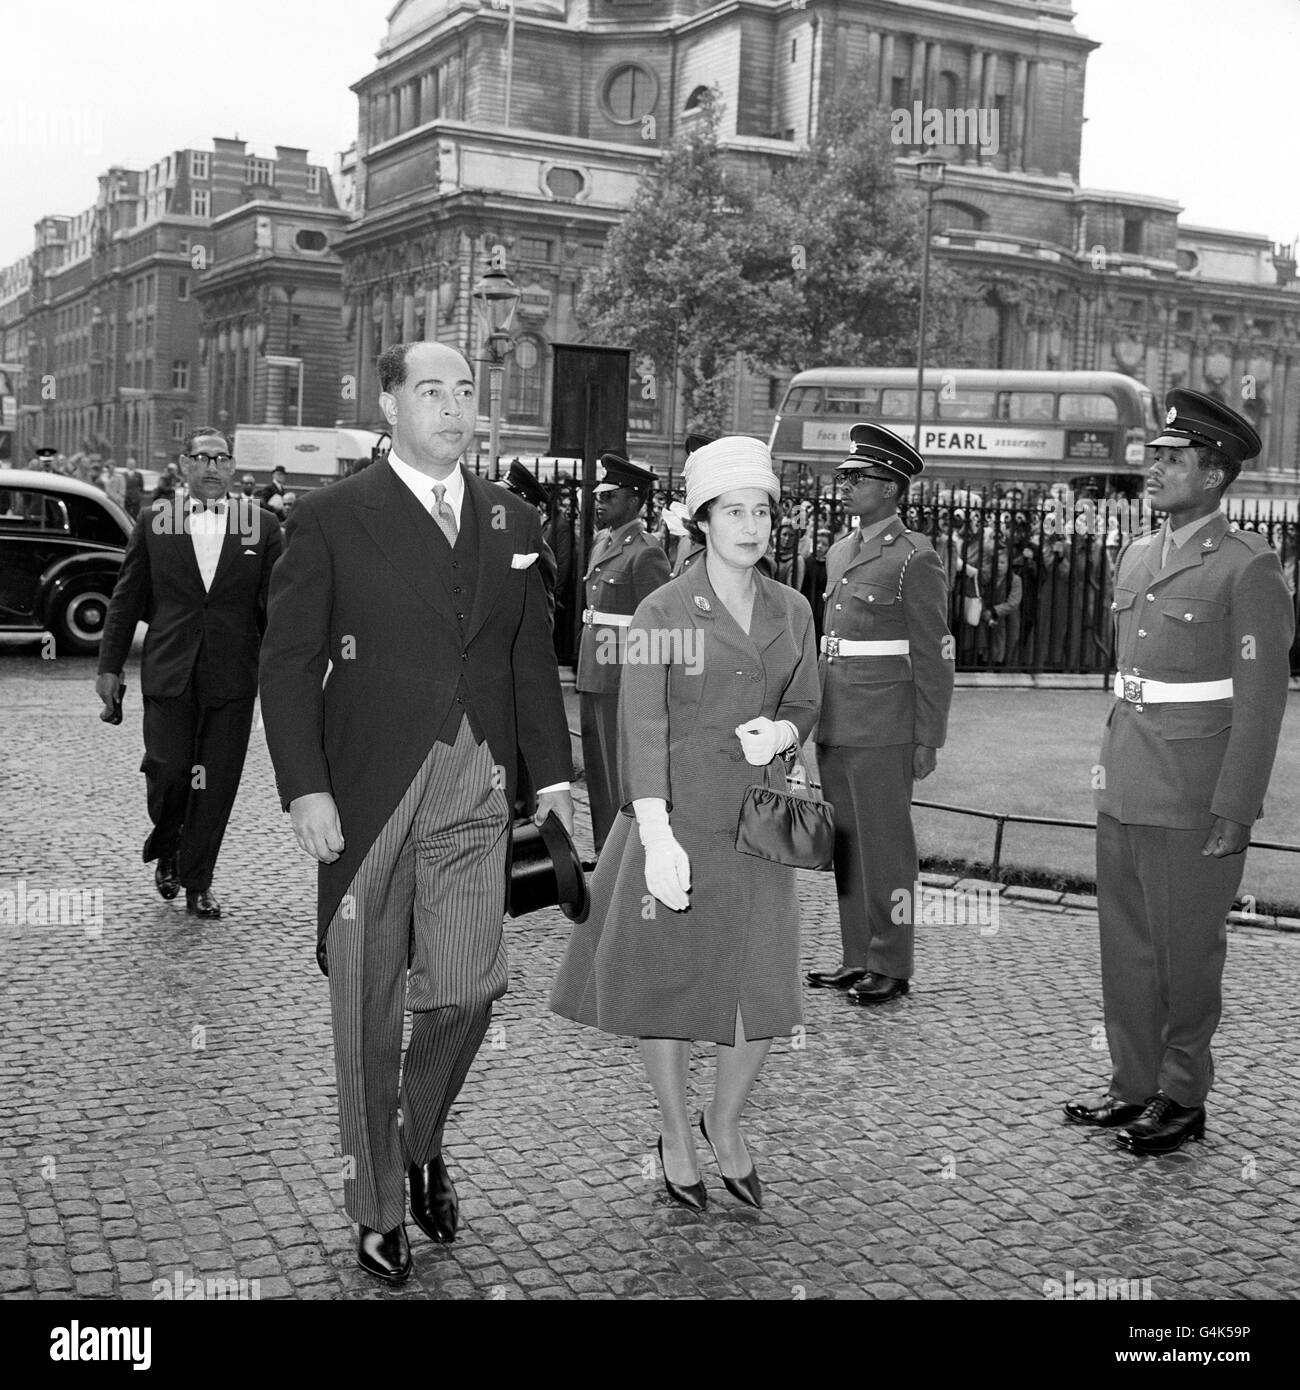 Mr I.S. de Souza, the Jamaican Head of Mission, and his wife arriving at Westminster Abbey at a service to mark the attainment of independence by Jamaica. Stock Photo